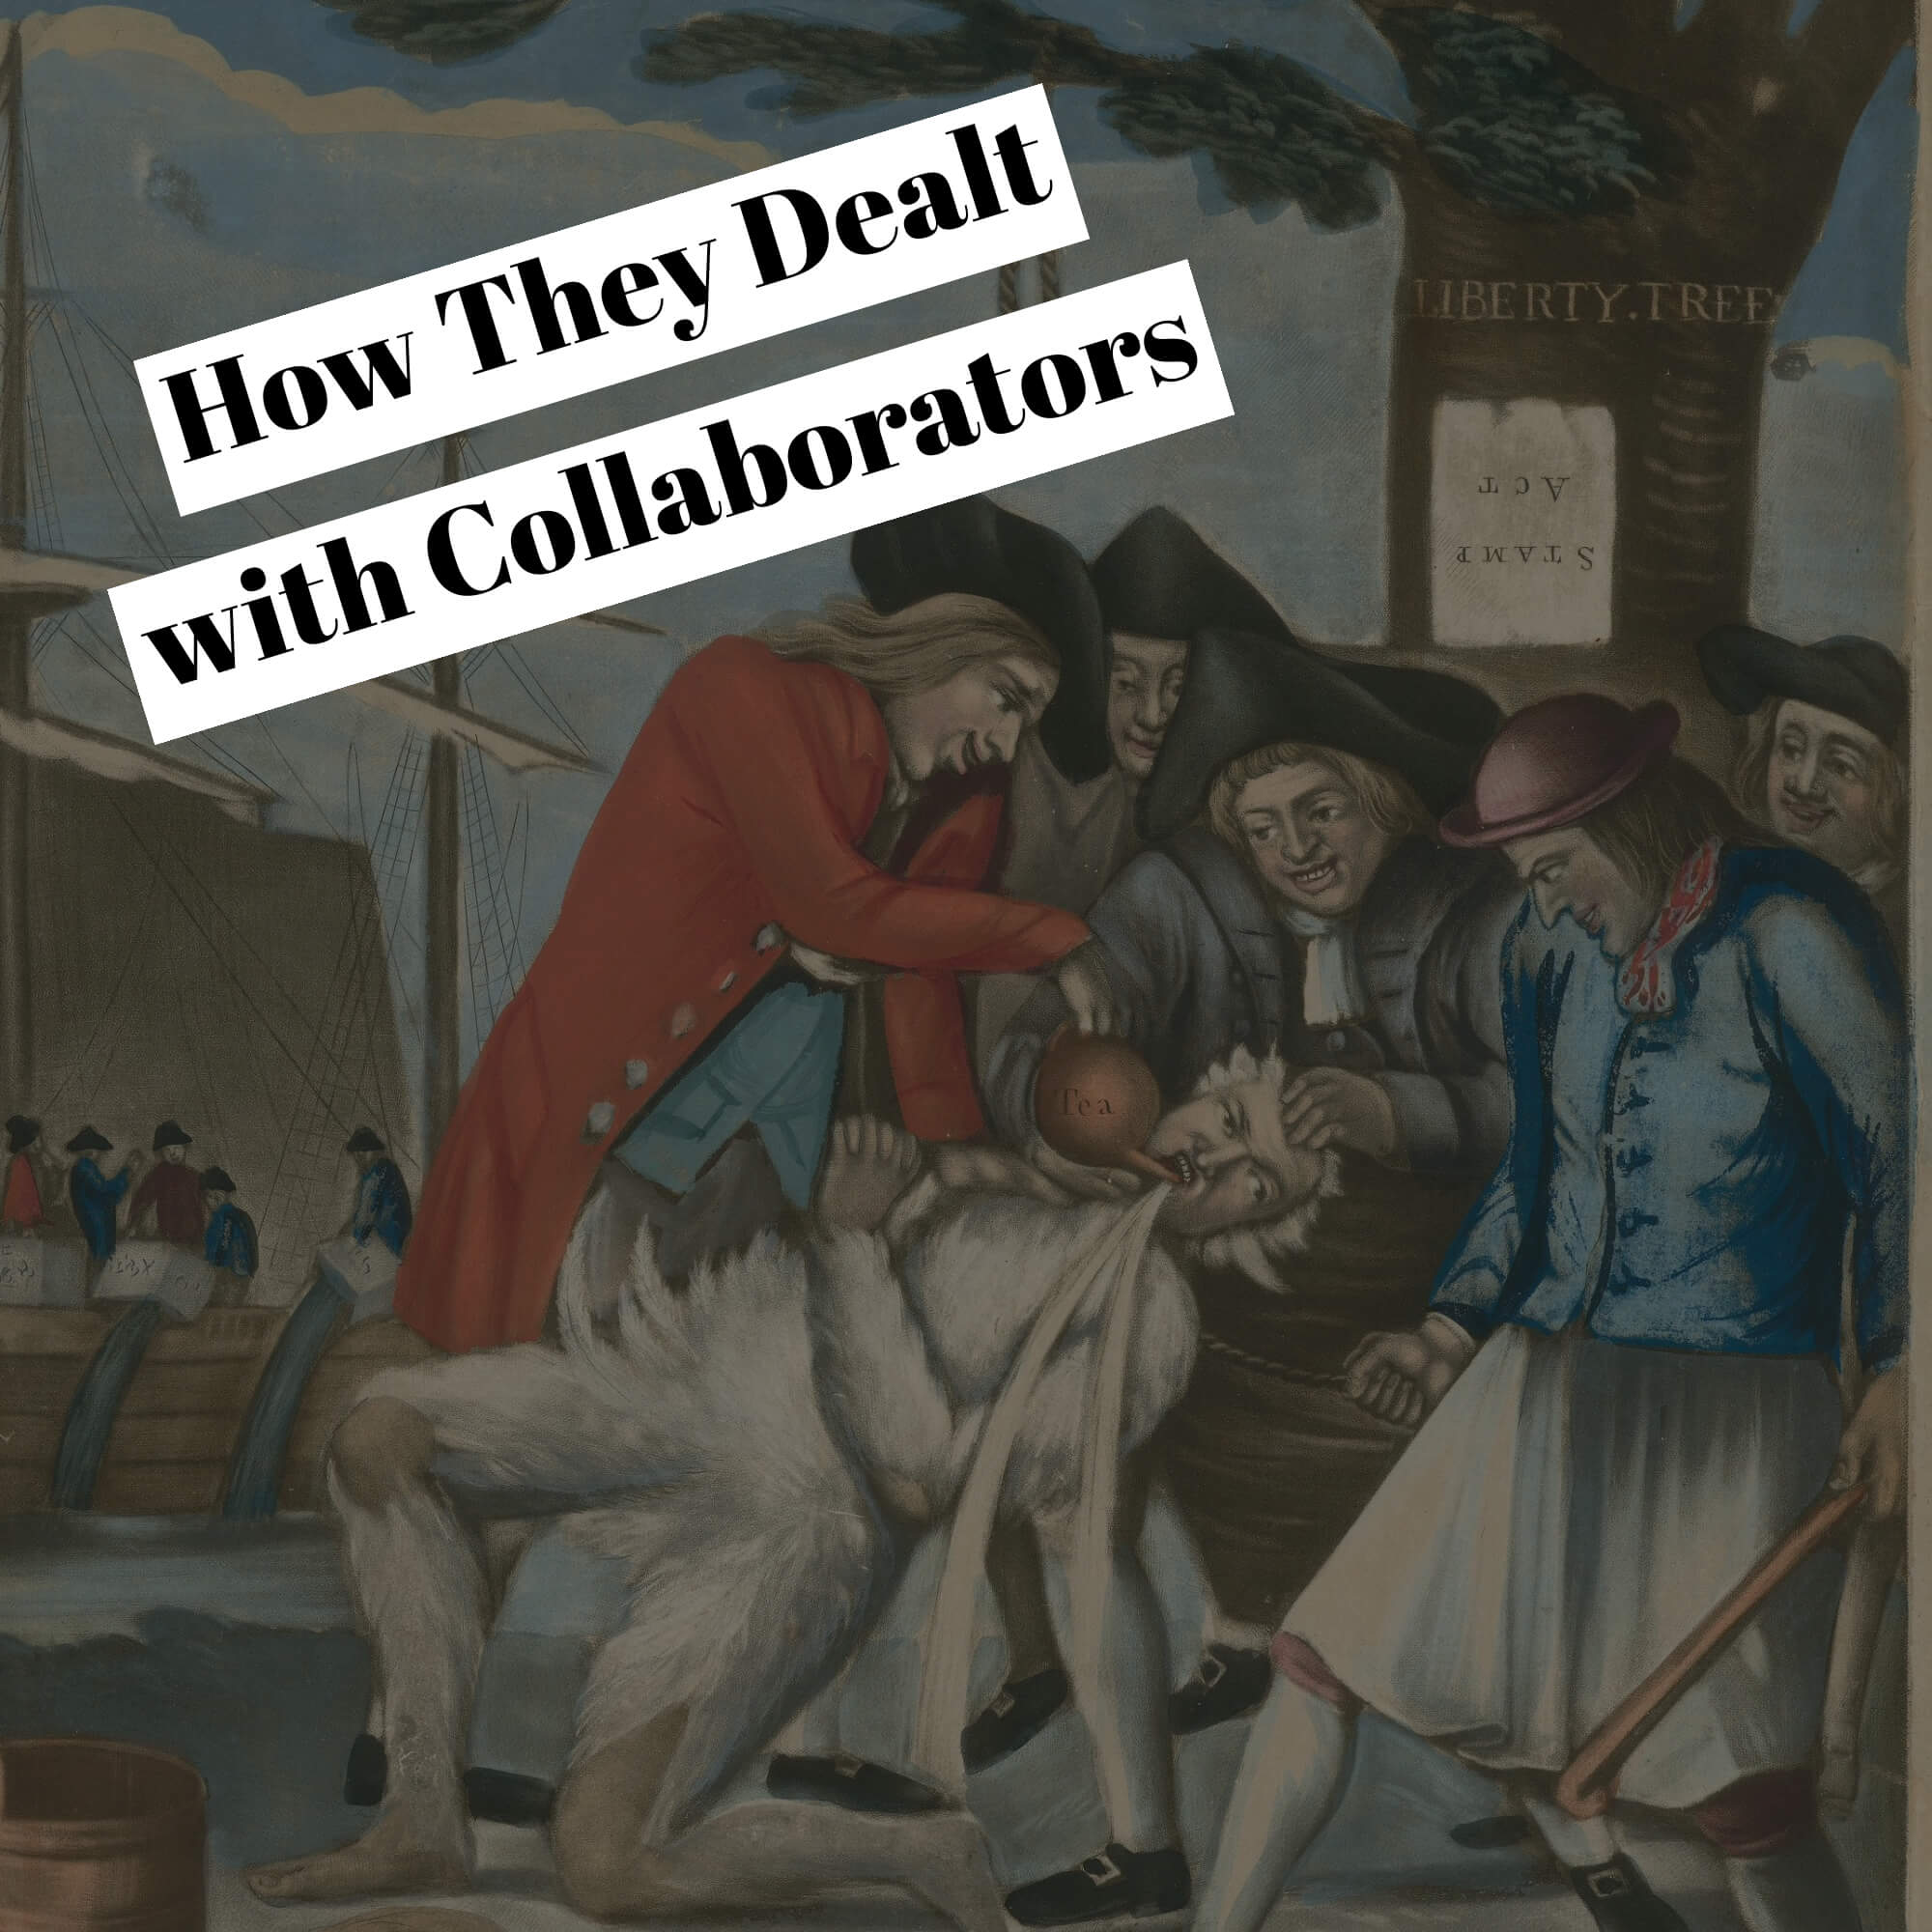 How they Dealt with Collaborators